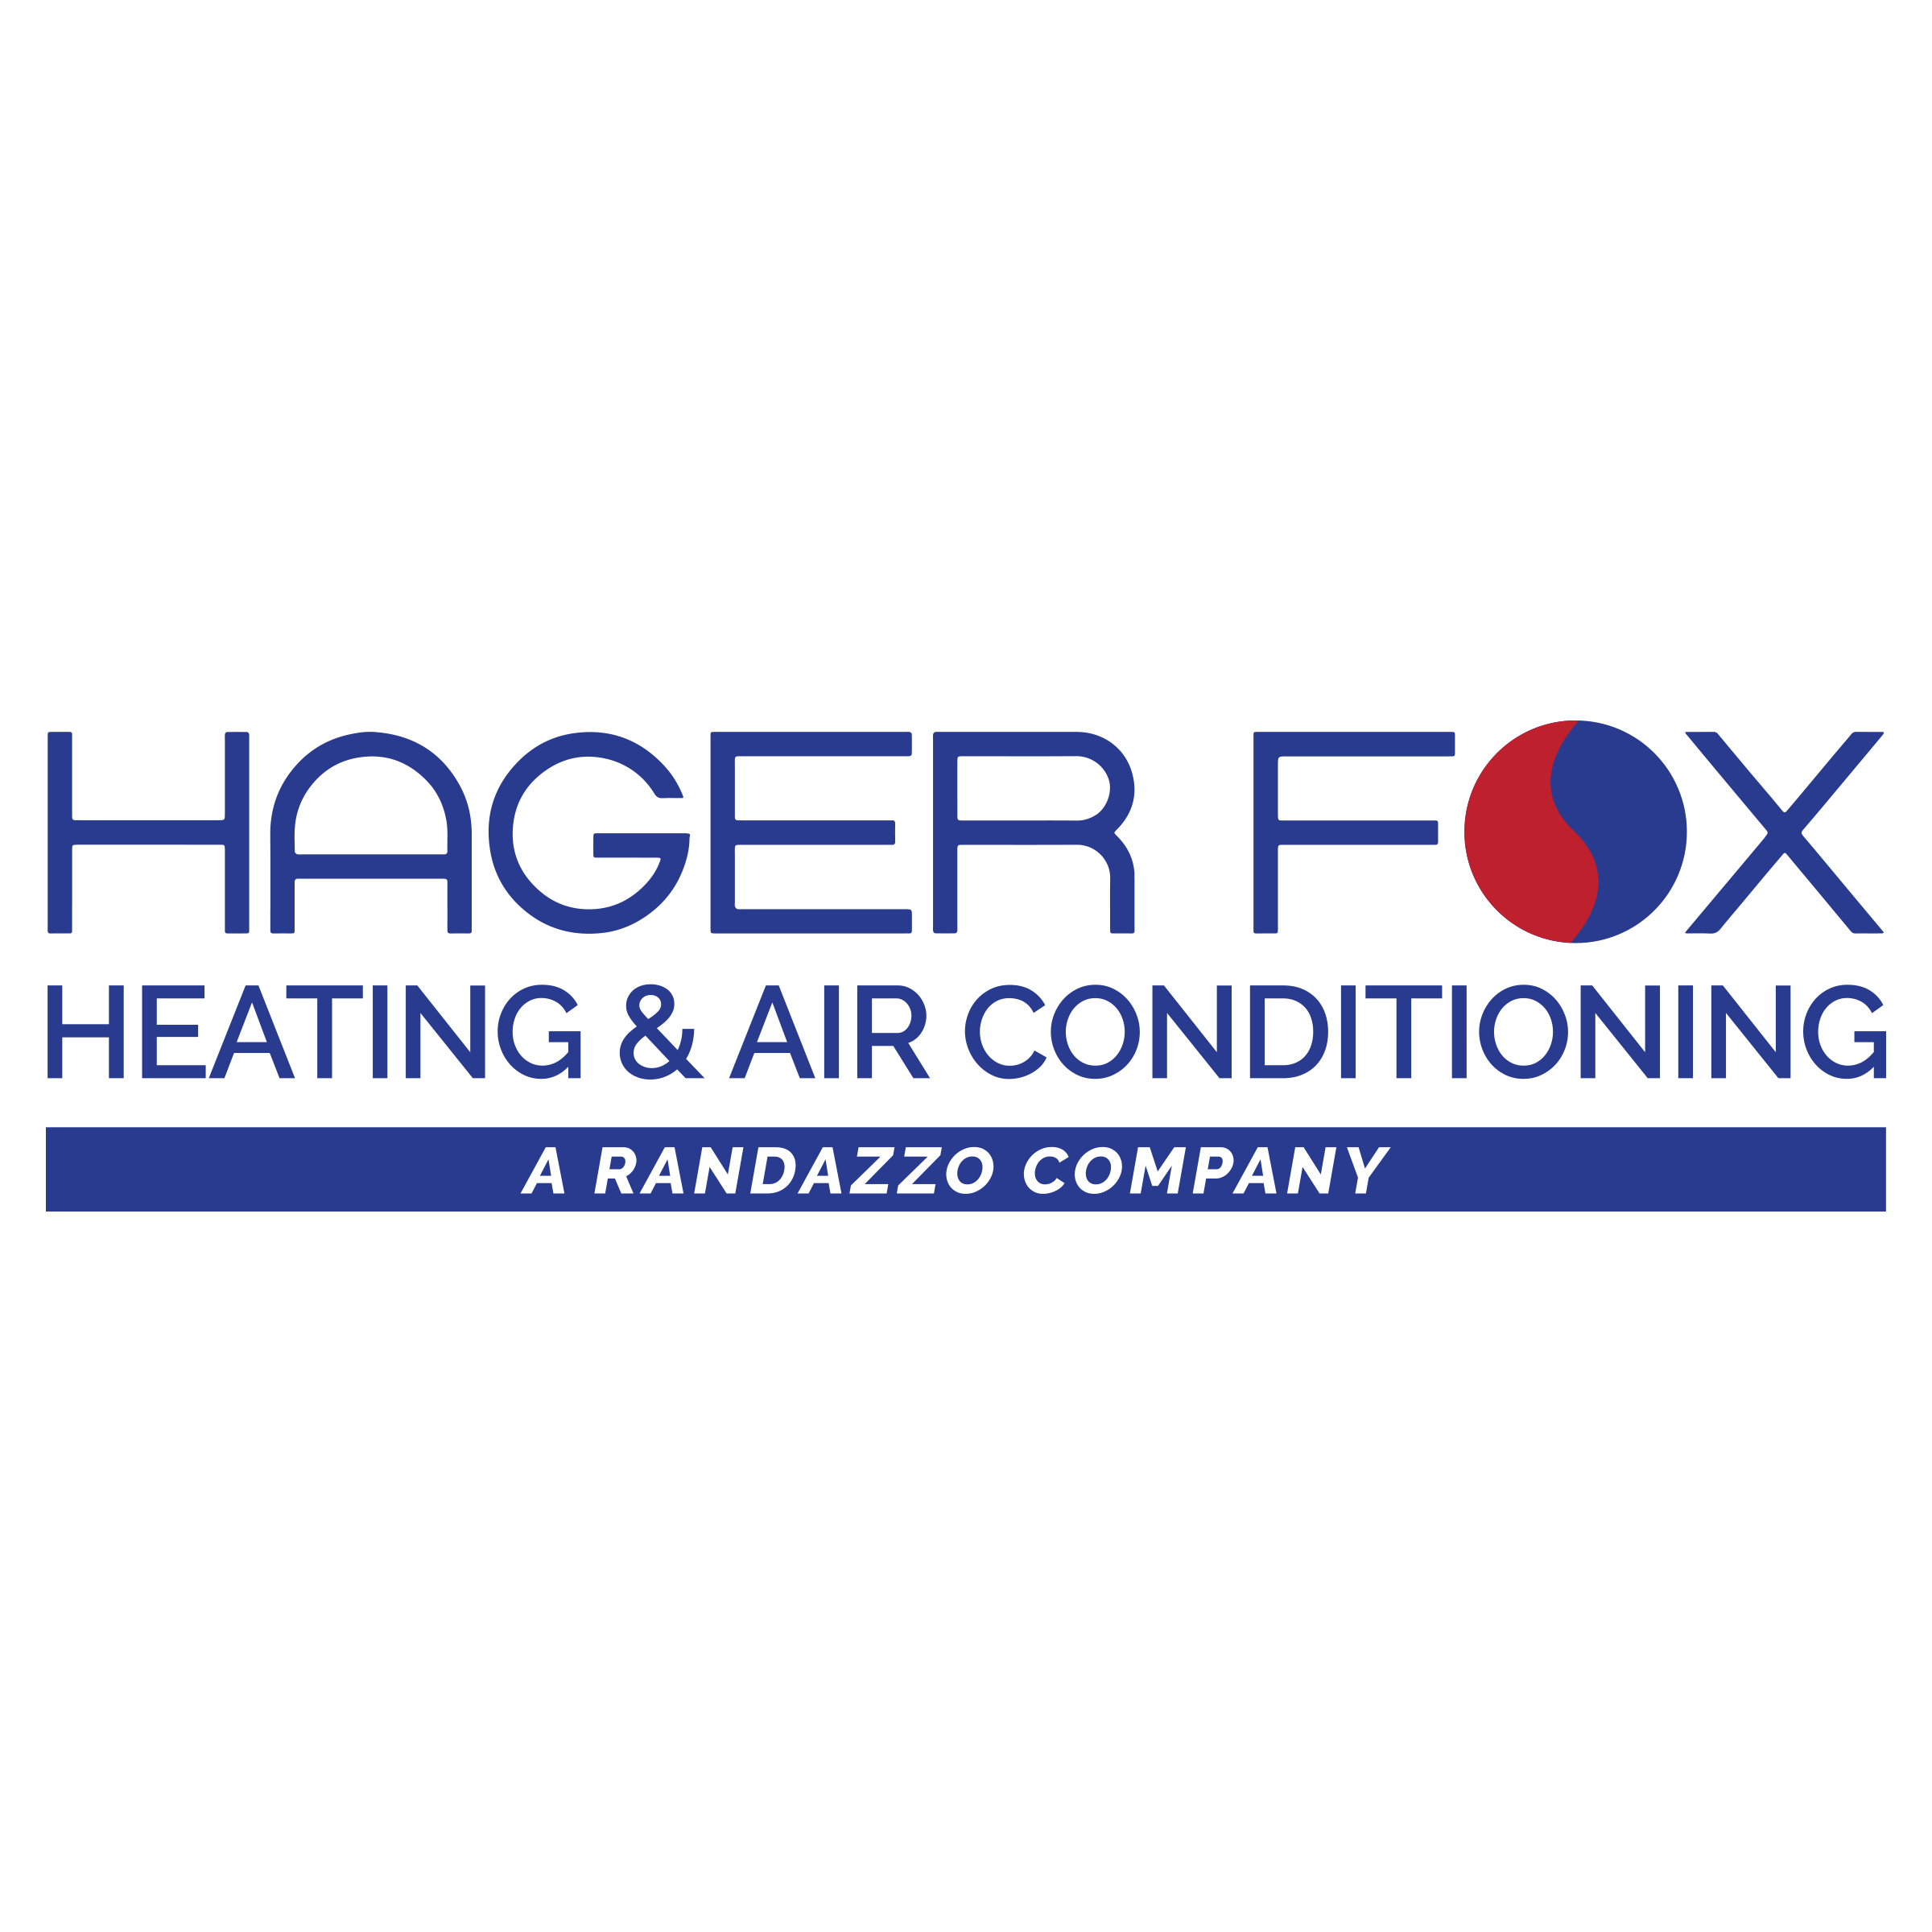 Hager Fox Heating & Air Conditioning Photo